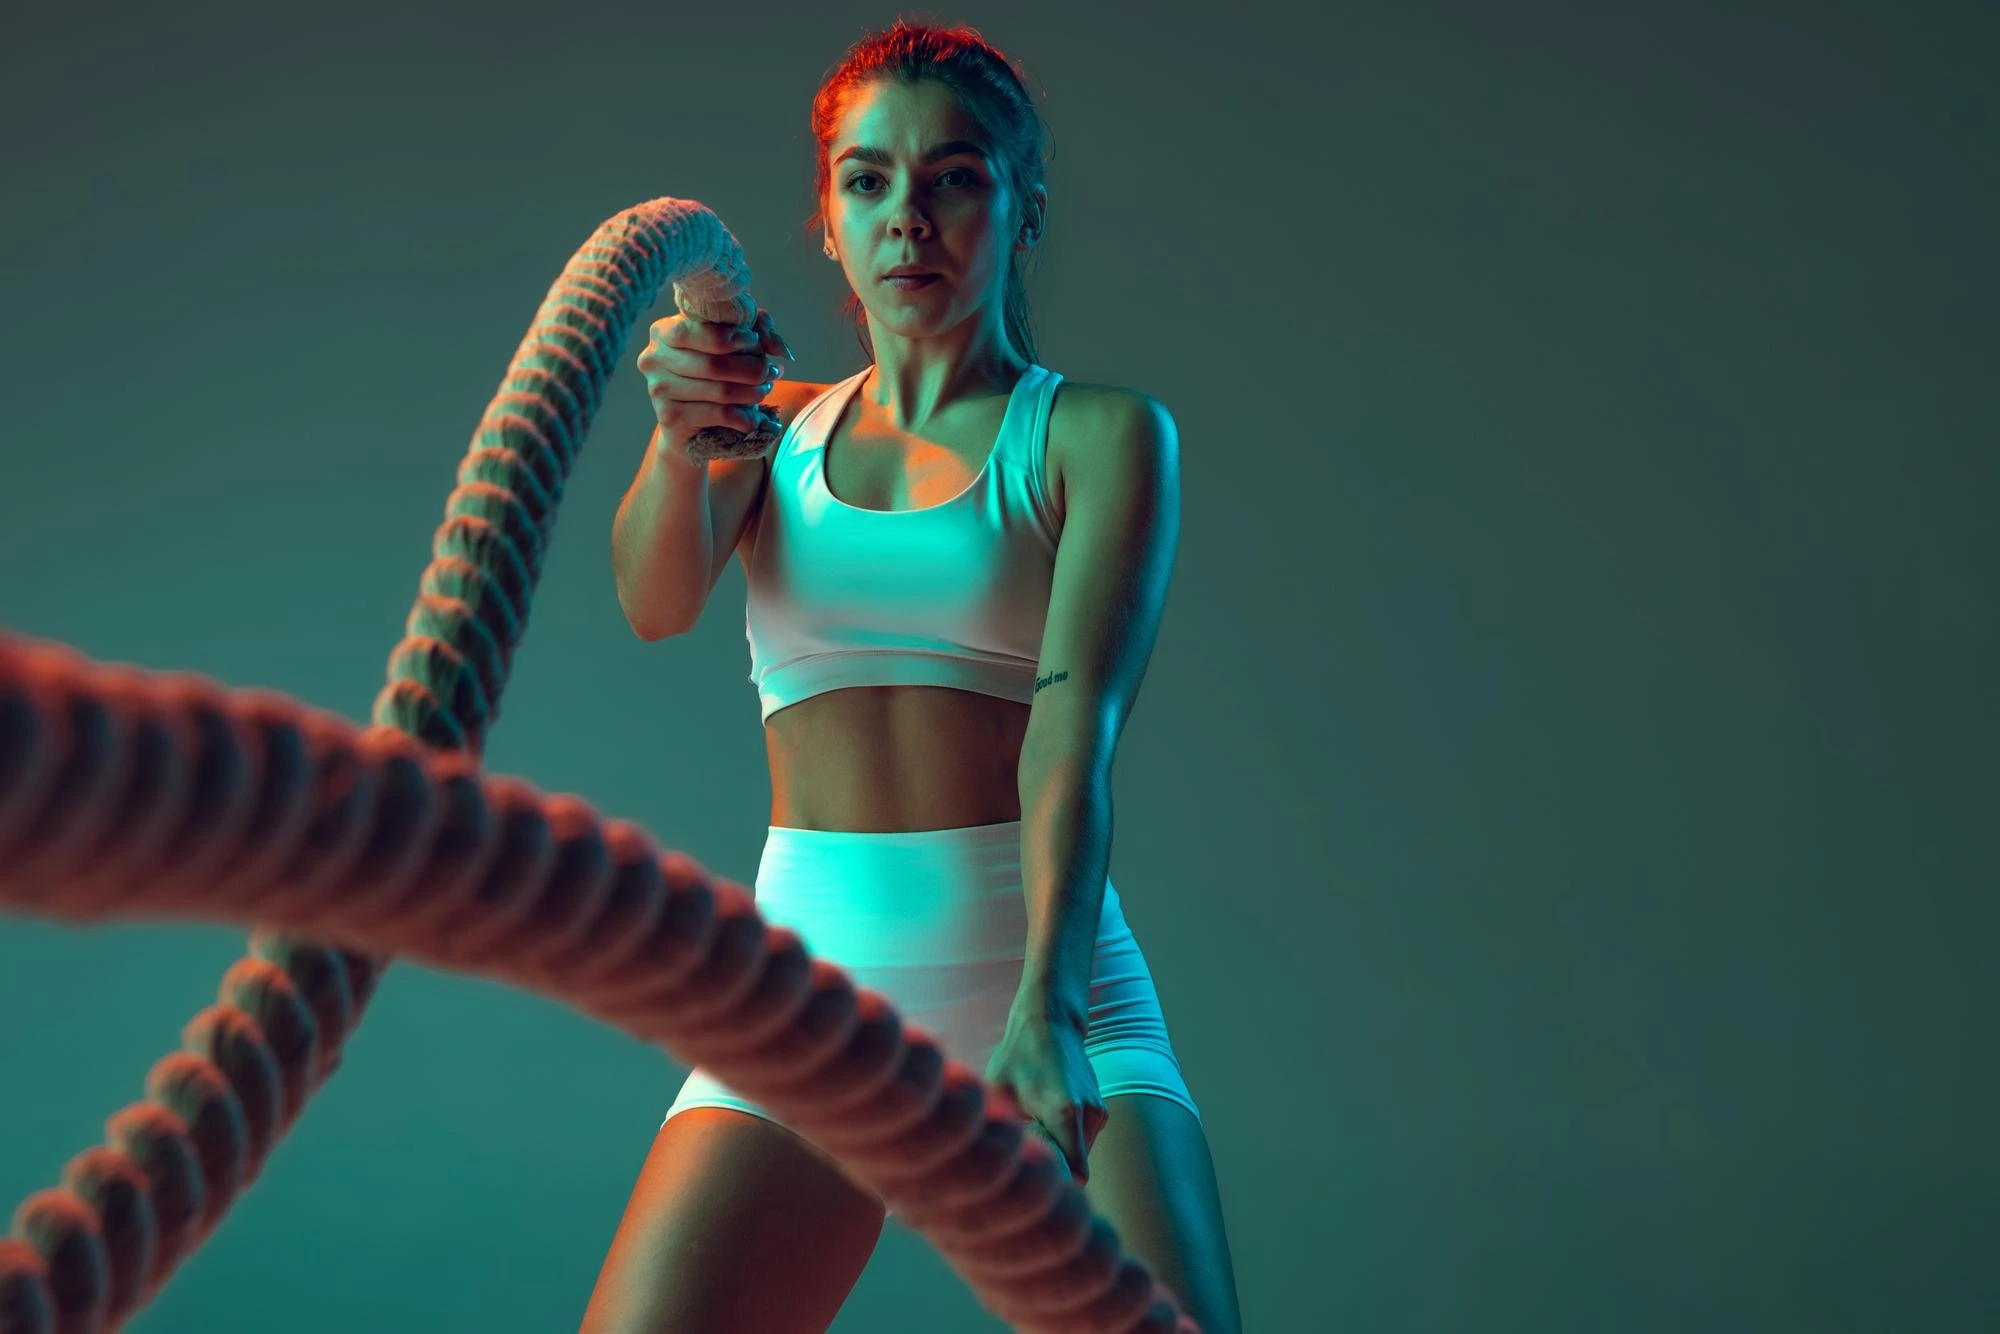 portrait young spotive girl doing exercises with rope keeping body fit isolated green background neon 155003 45635